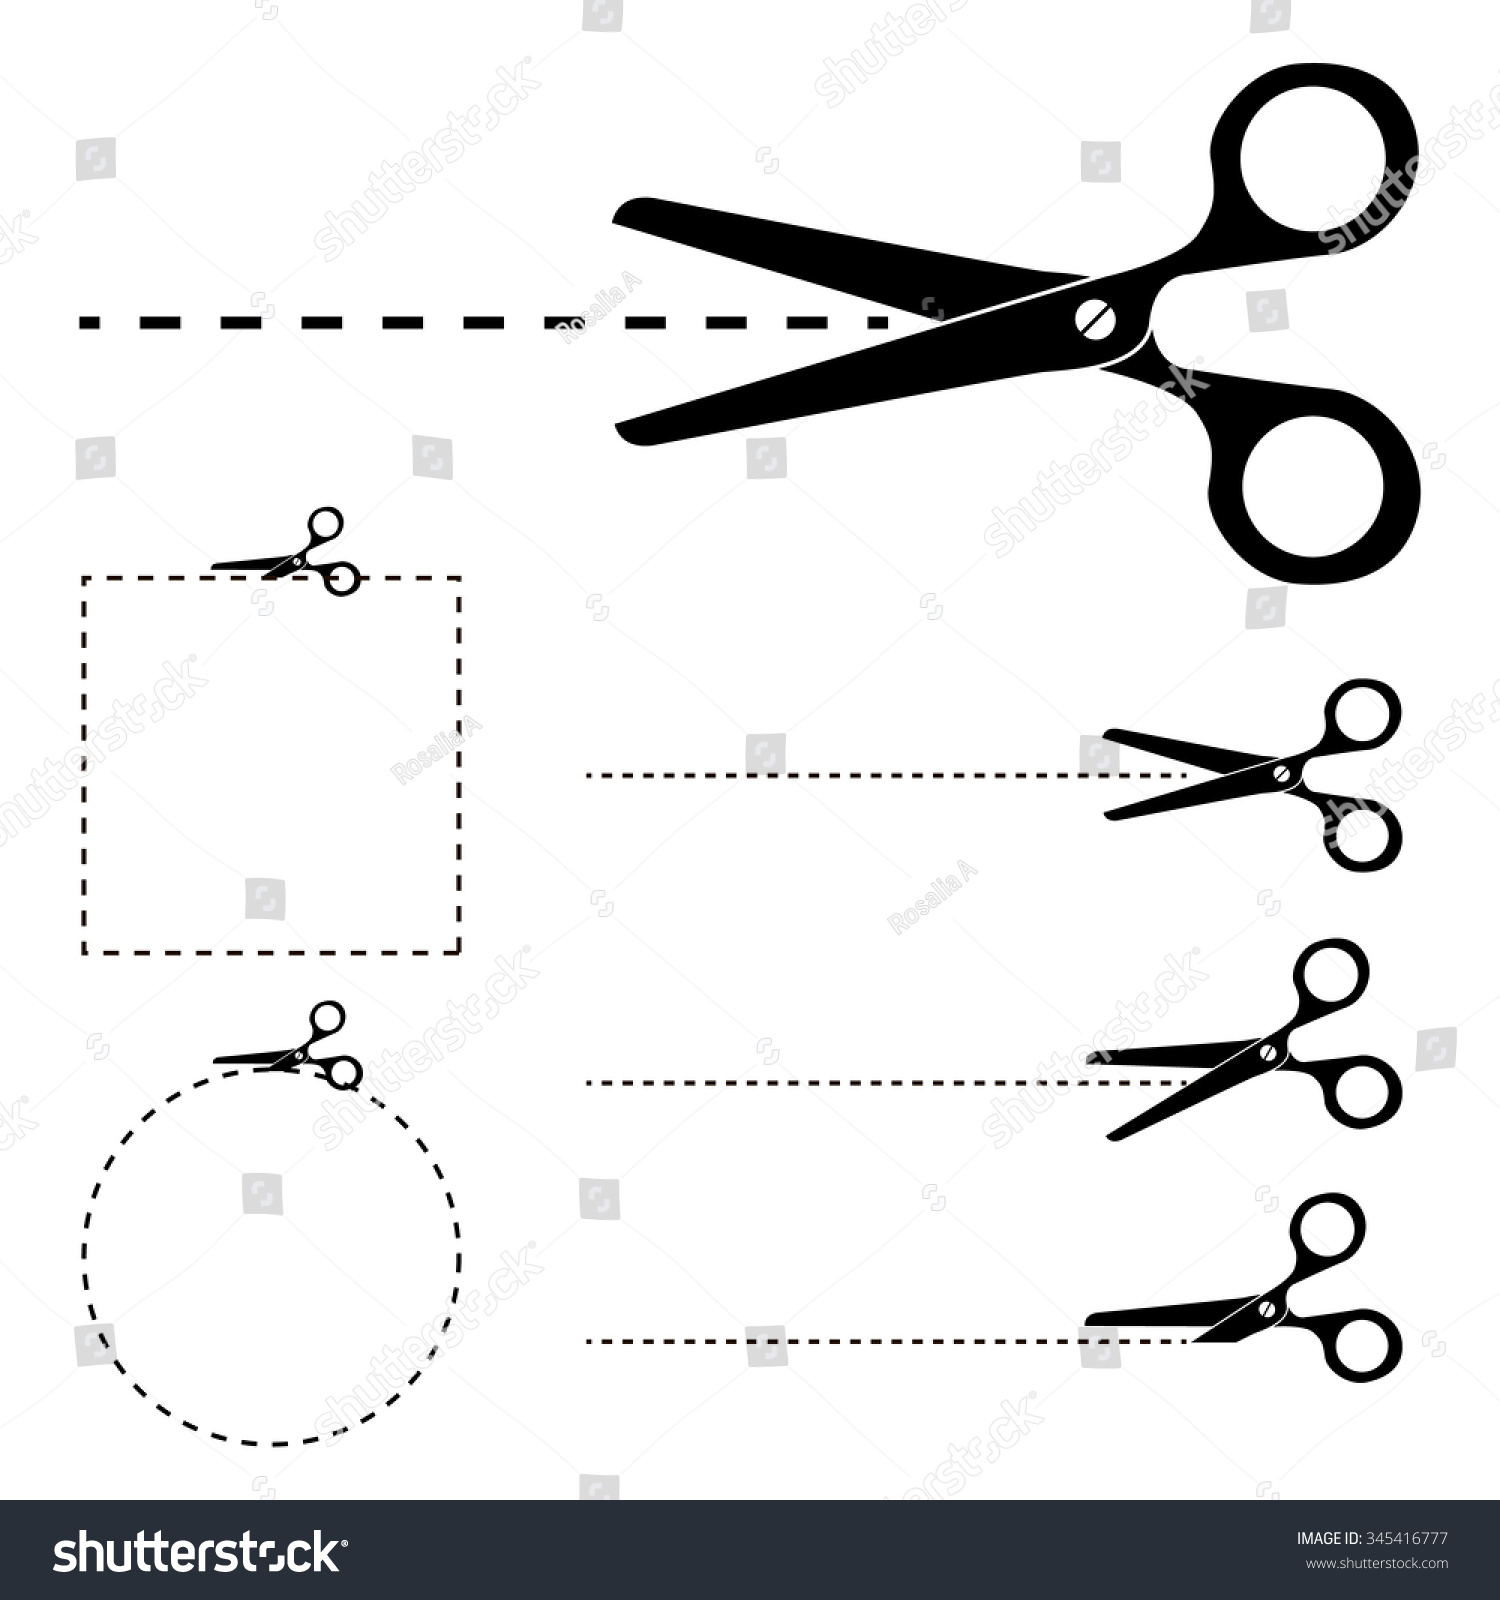 scissors with dotted line clip art - photo #45